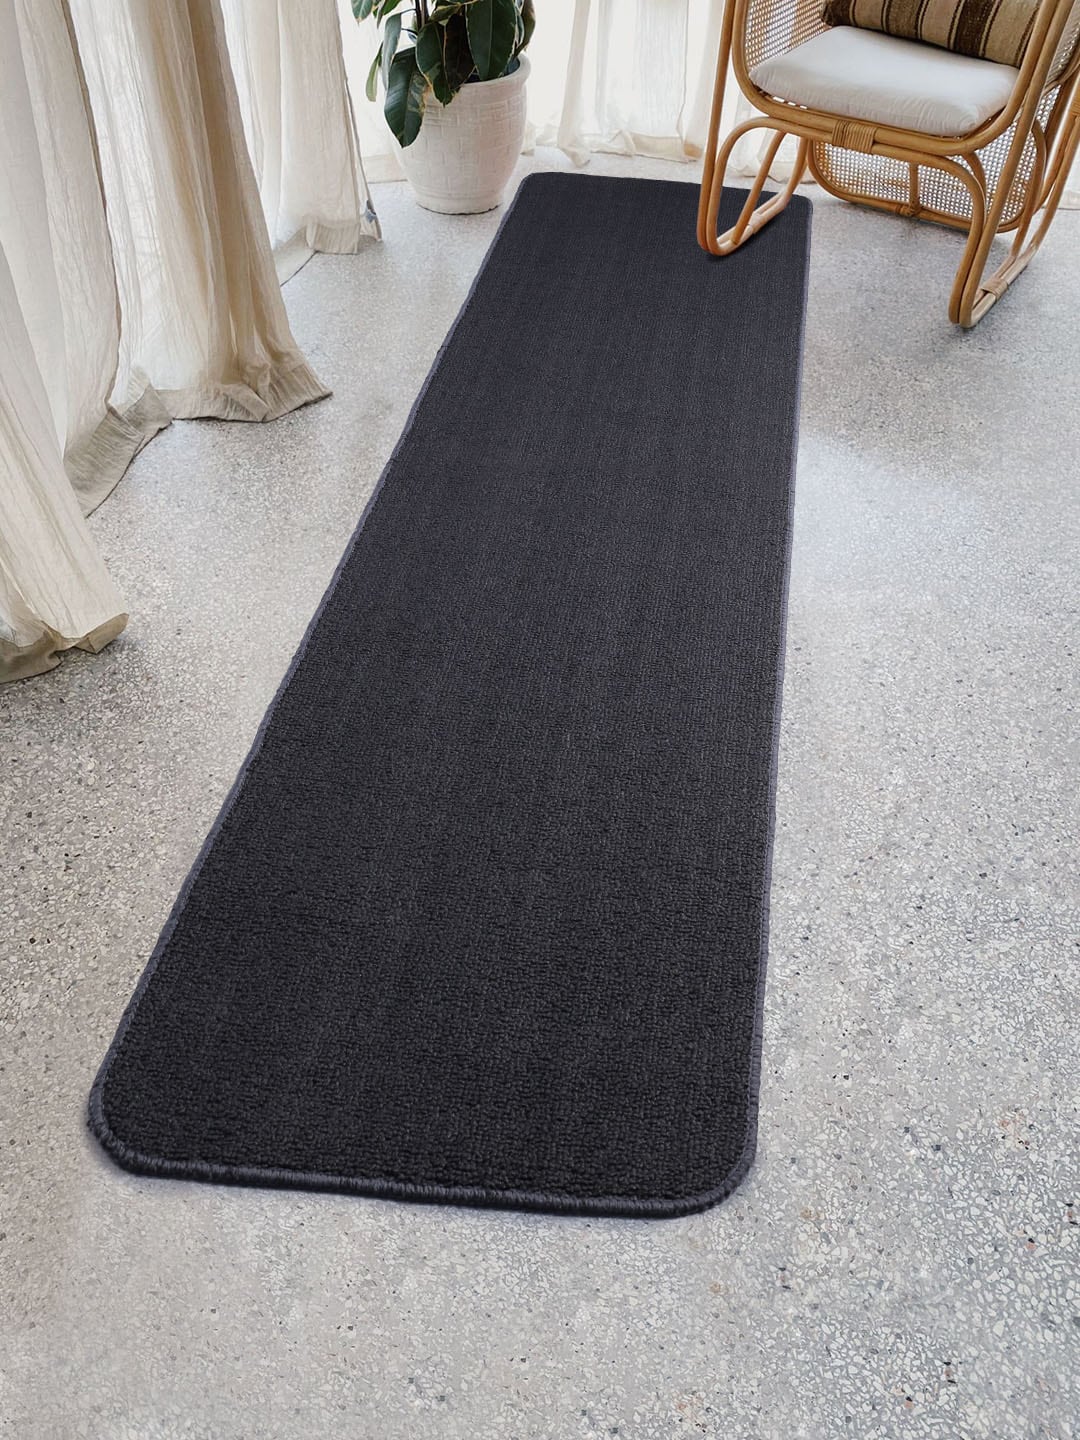 Saral Home Grey Solid Anti Skid Floor Runner Price in India